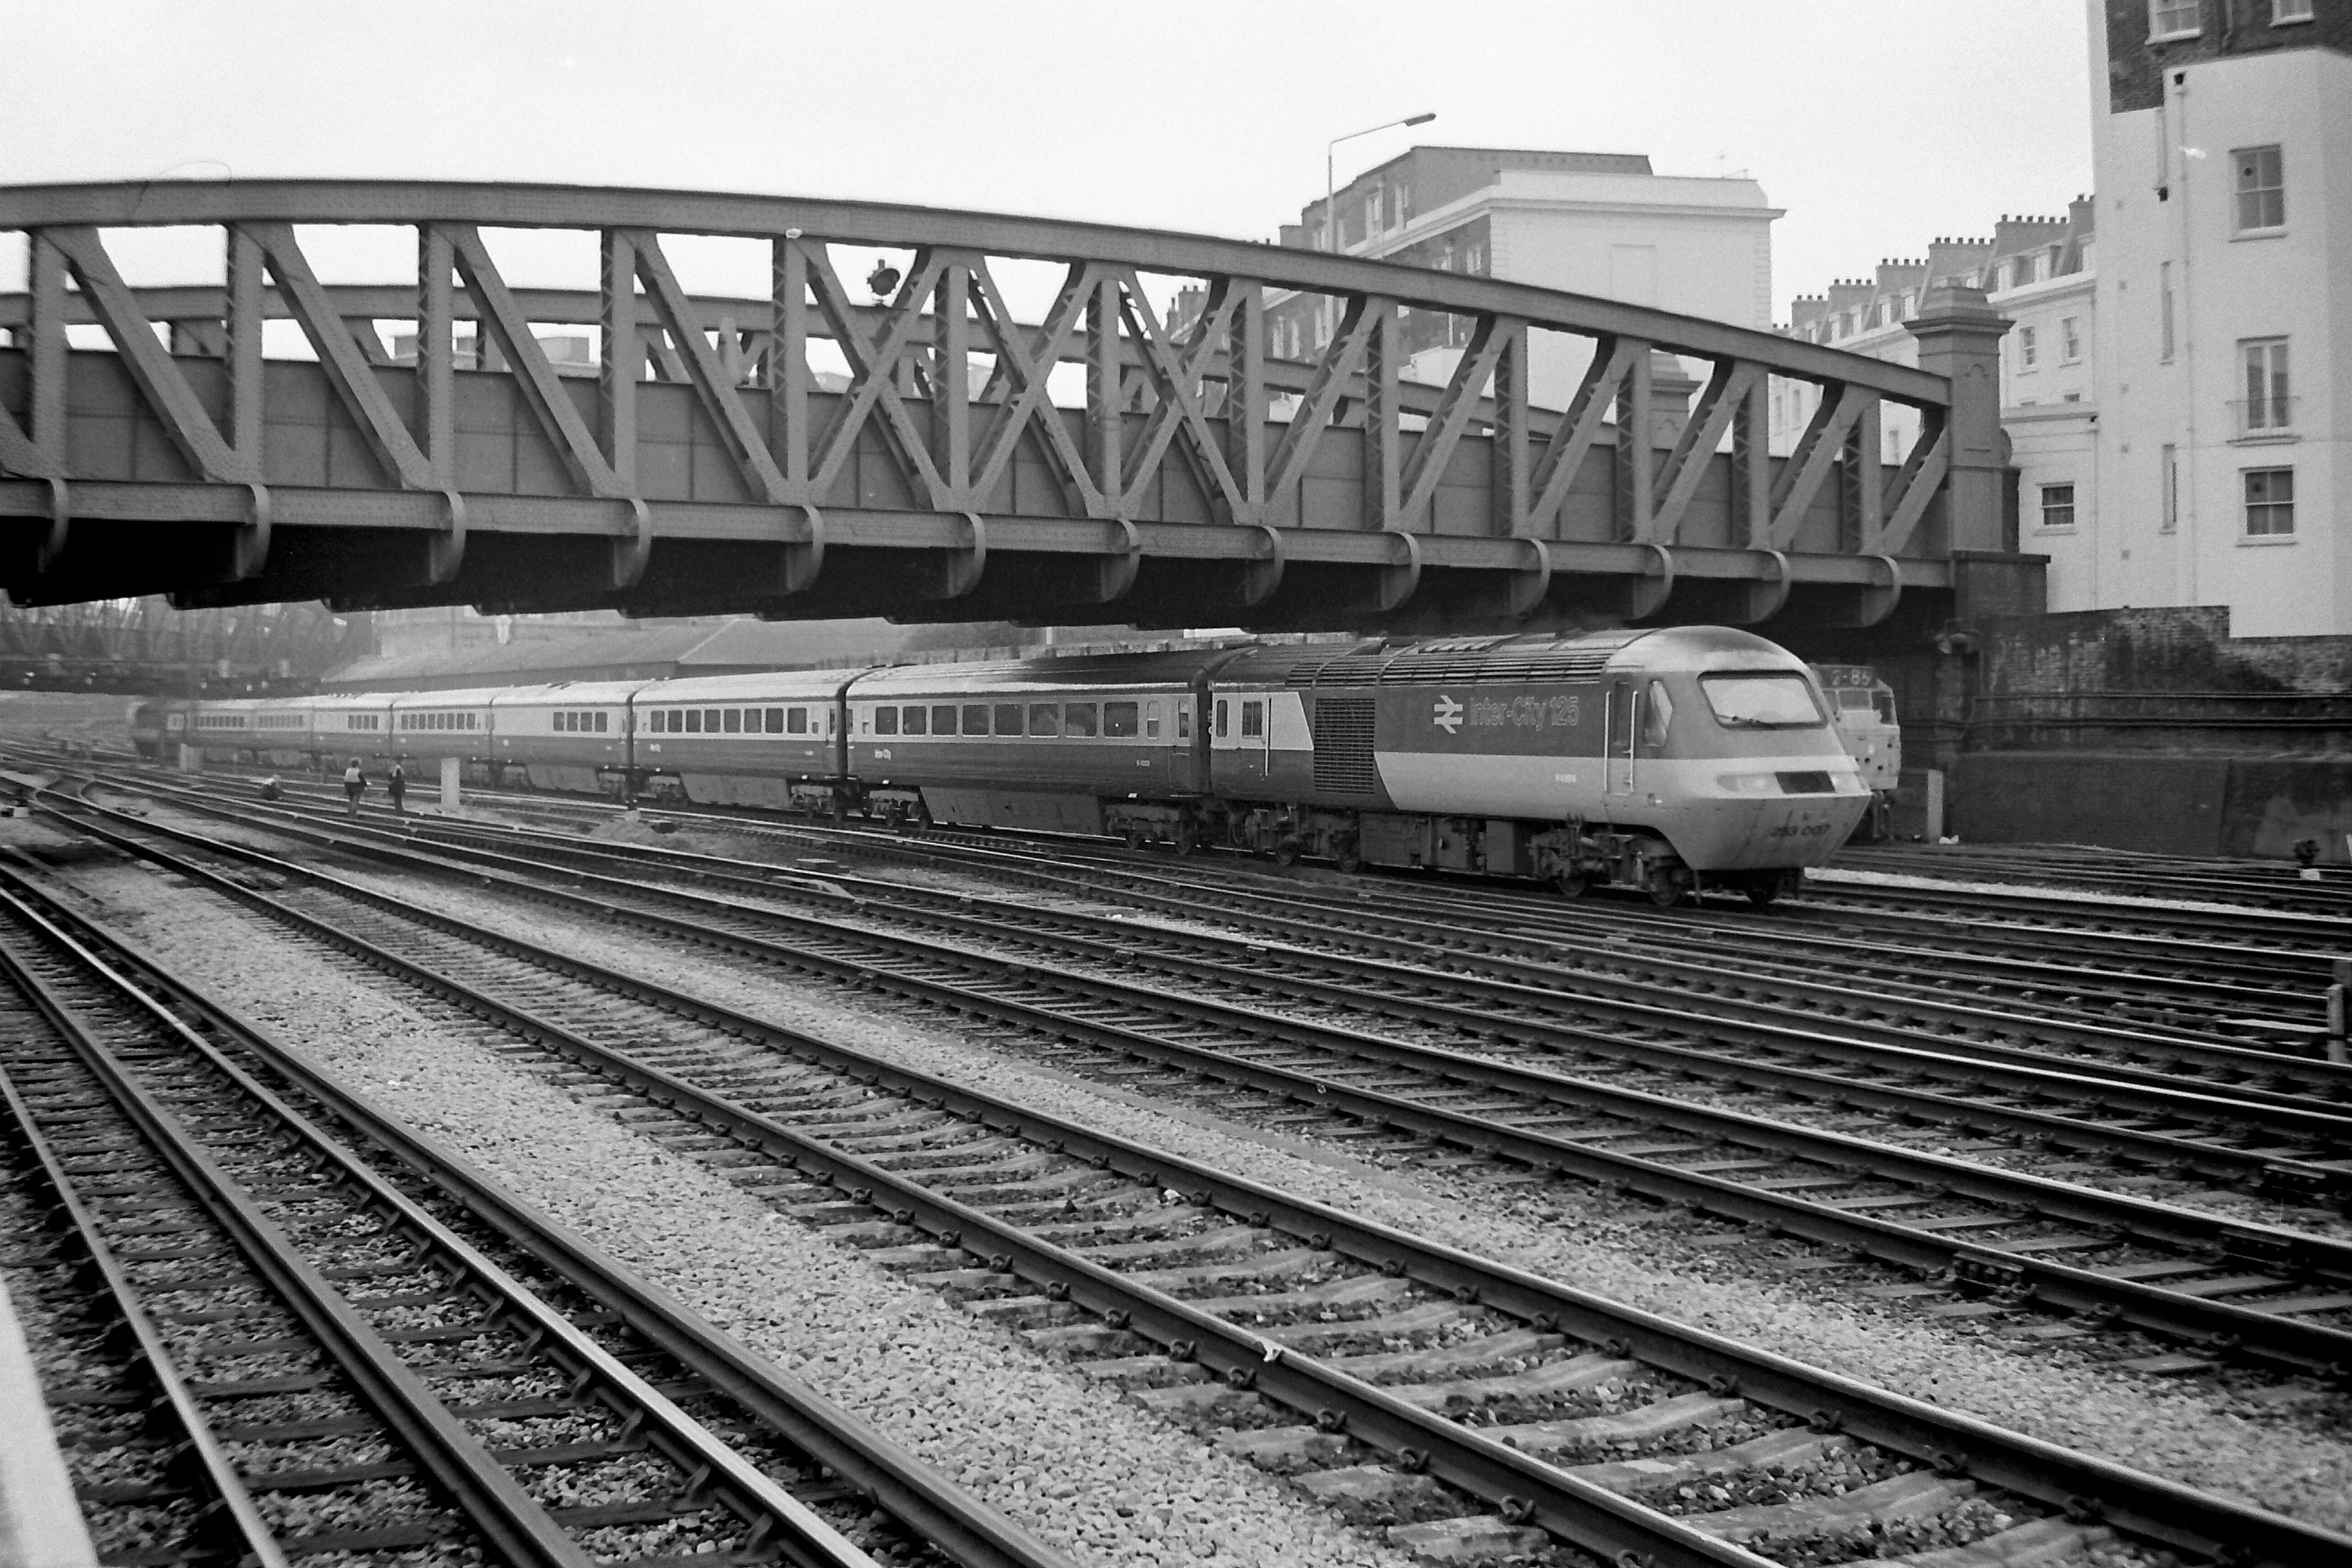 In the initial IC 125 livery as introduced on the Western Region the power car is photographed leaving Paddington on a service heading westwards on 21st April 1977. The picture is taken from Royal Oak underground station platforms which now no longer exist. Note set number 253 007 low down on the ‘nose’ Bob Green